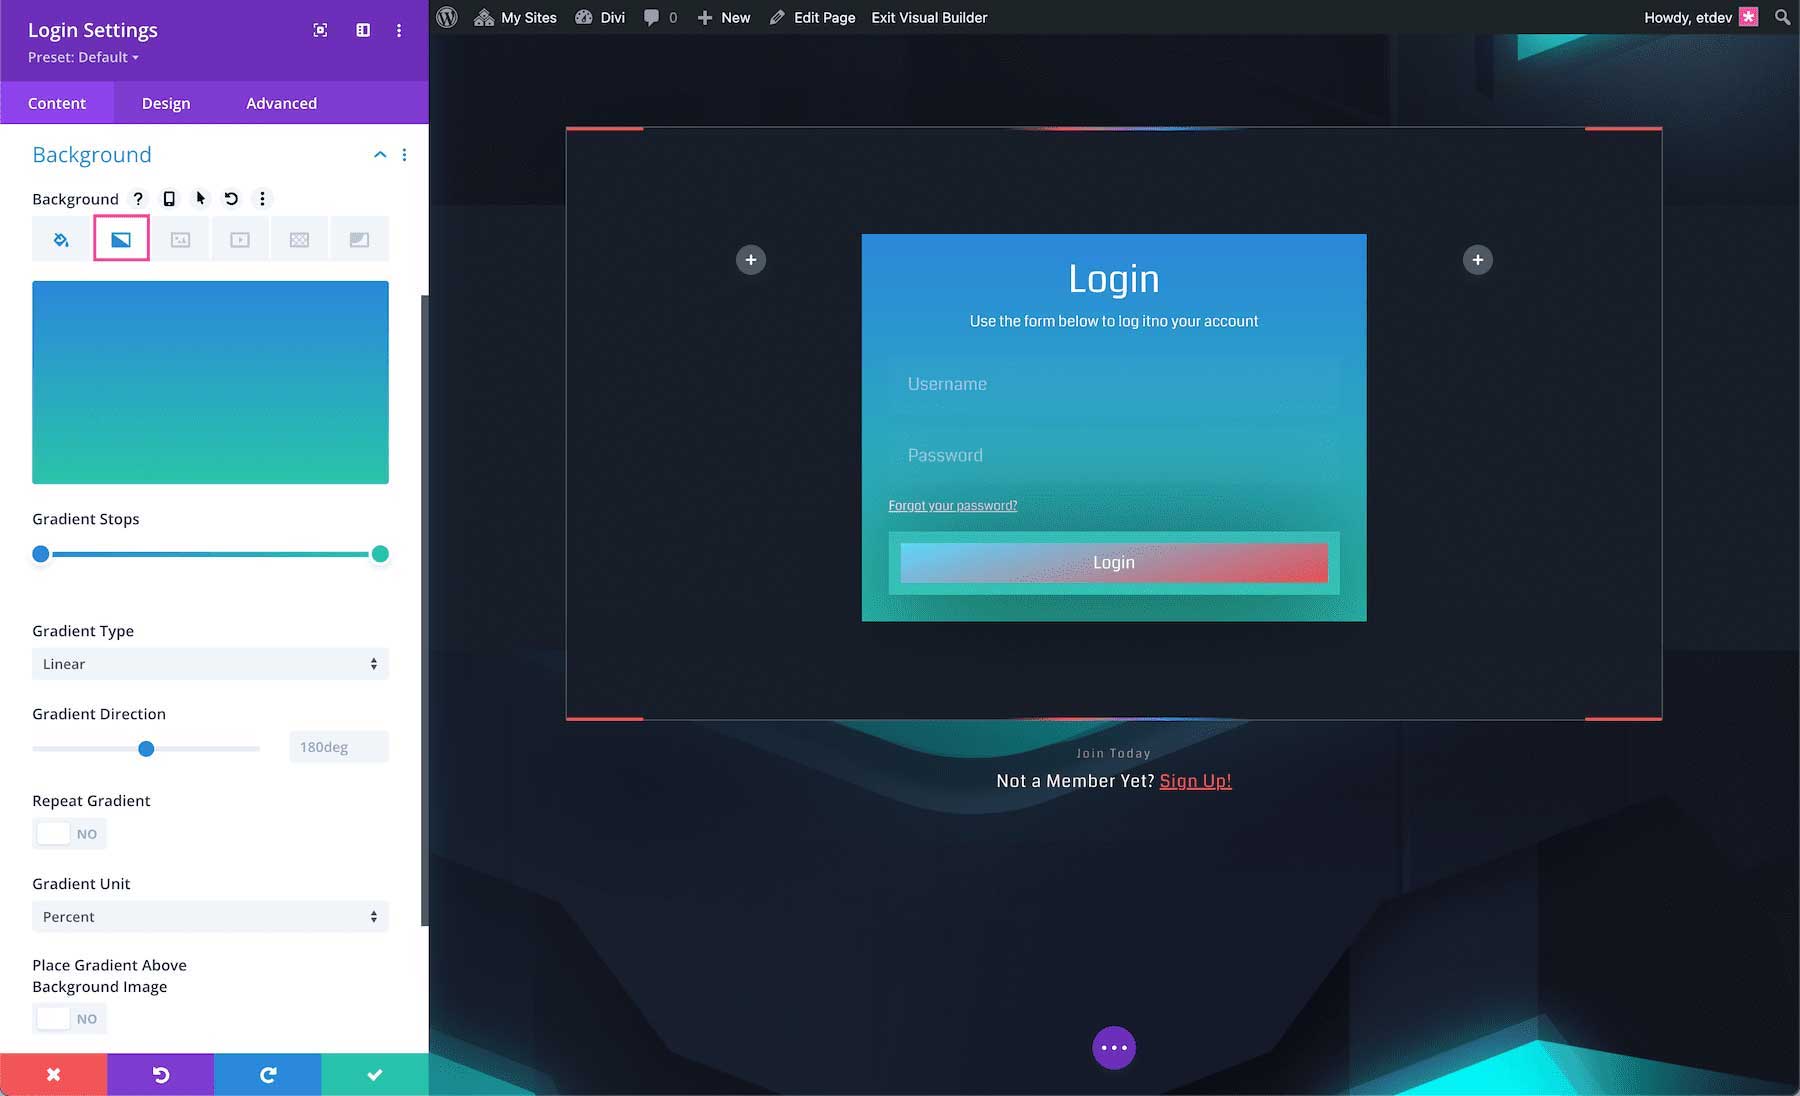 How to add a background gradient to the Divi Login Module